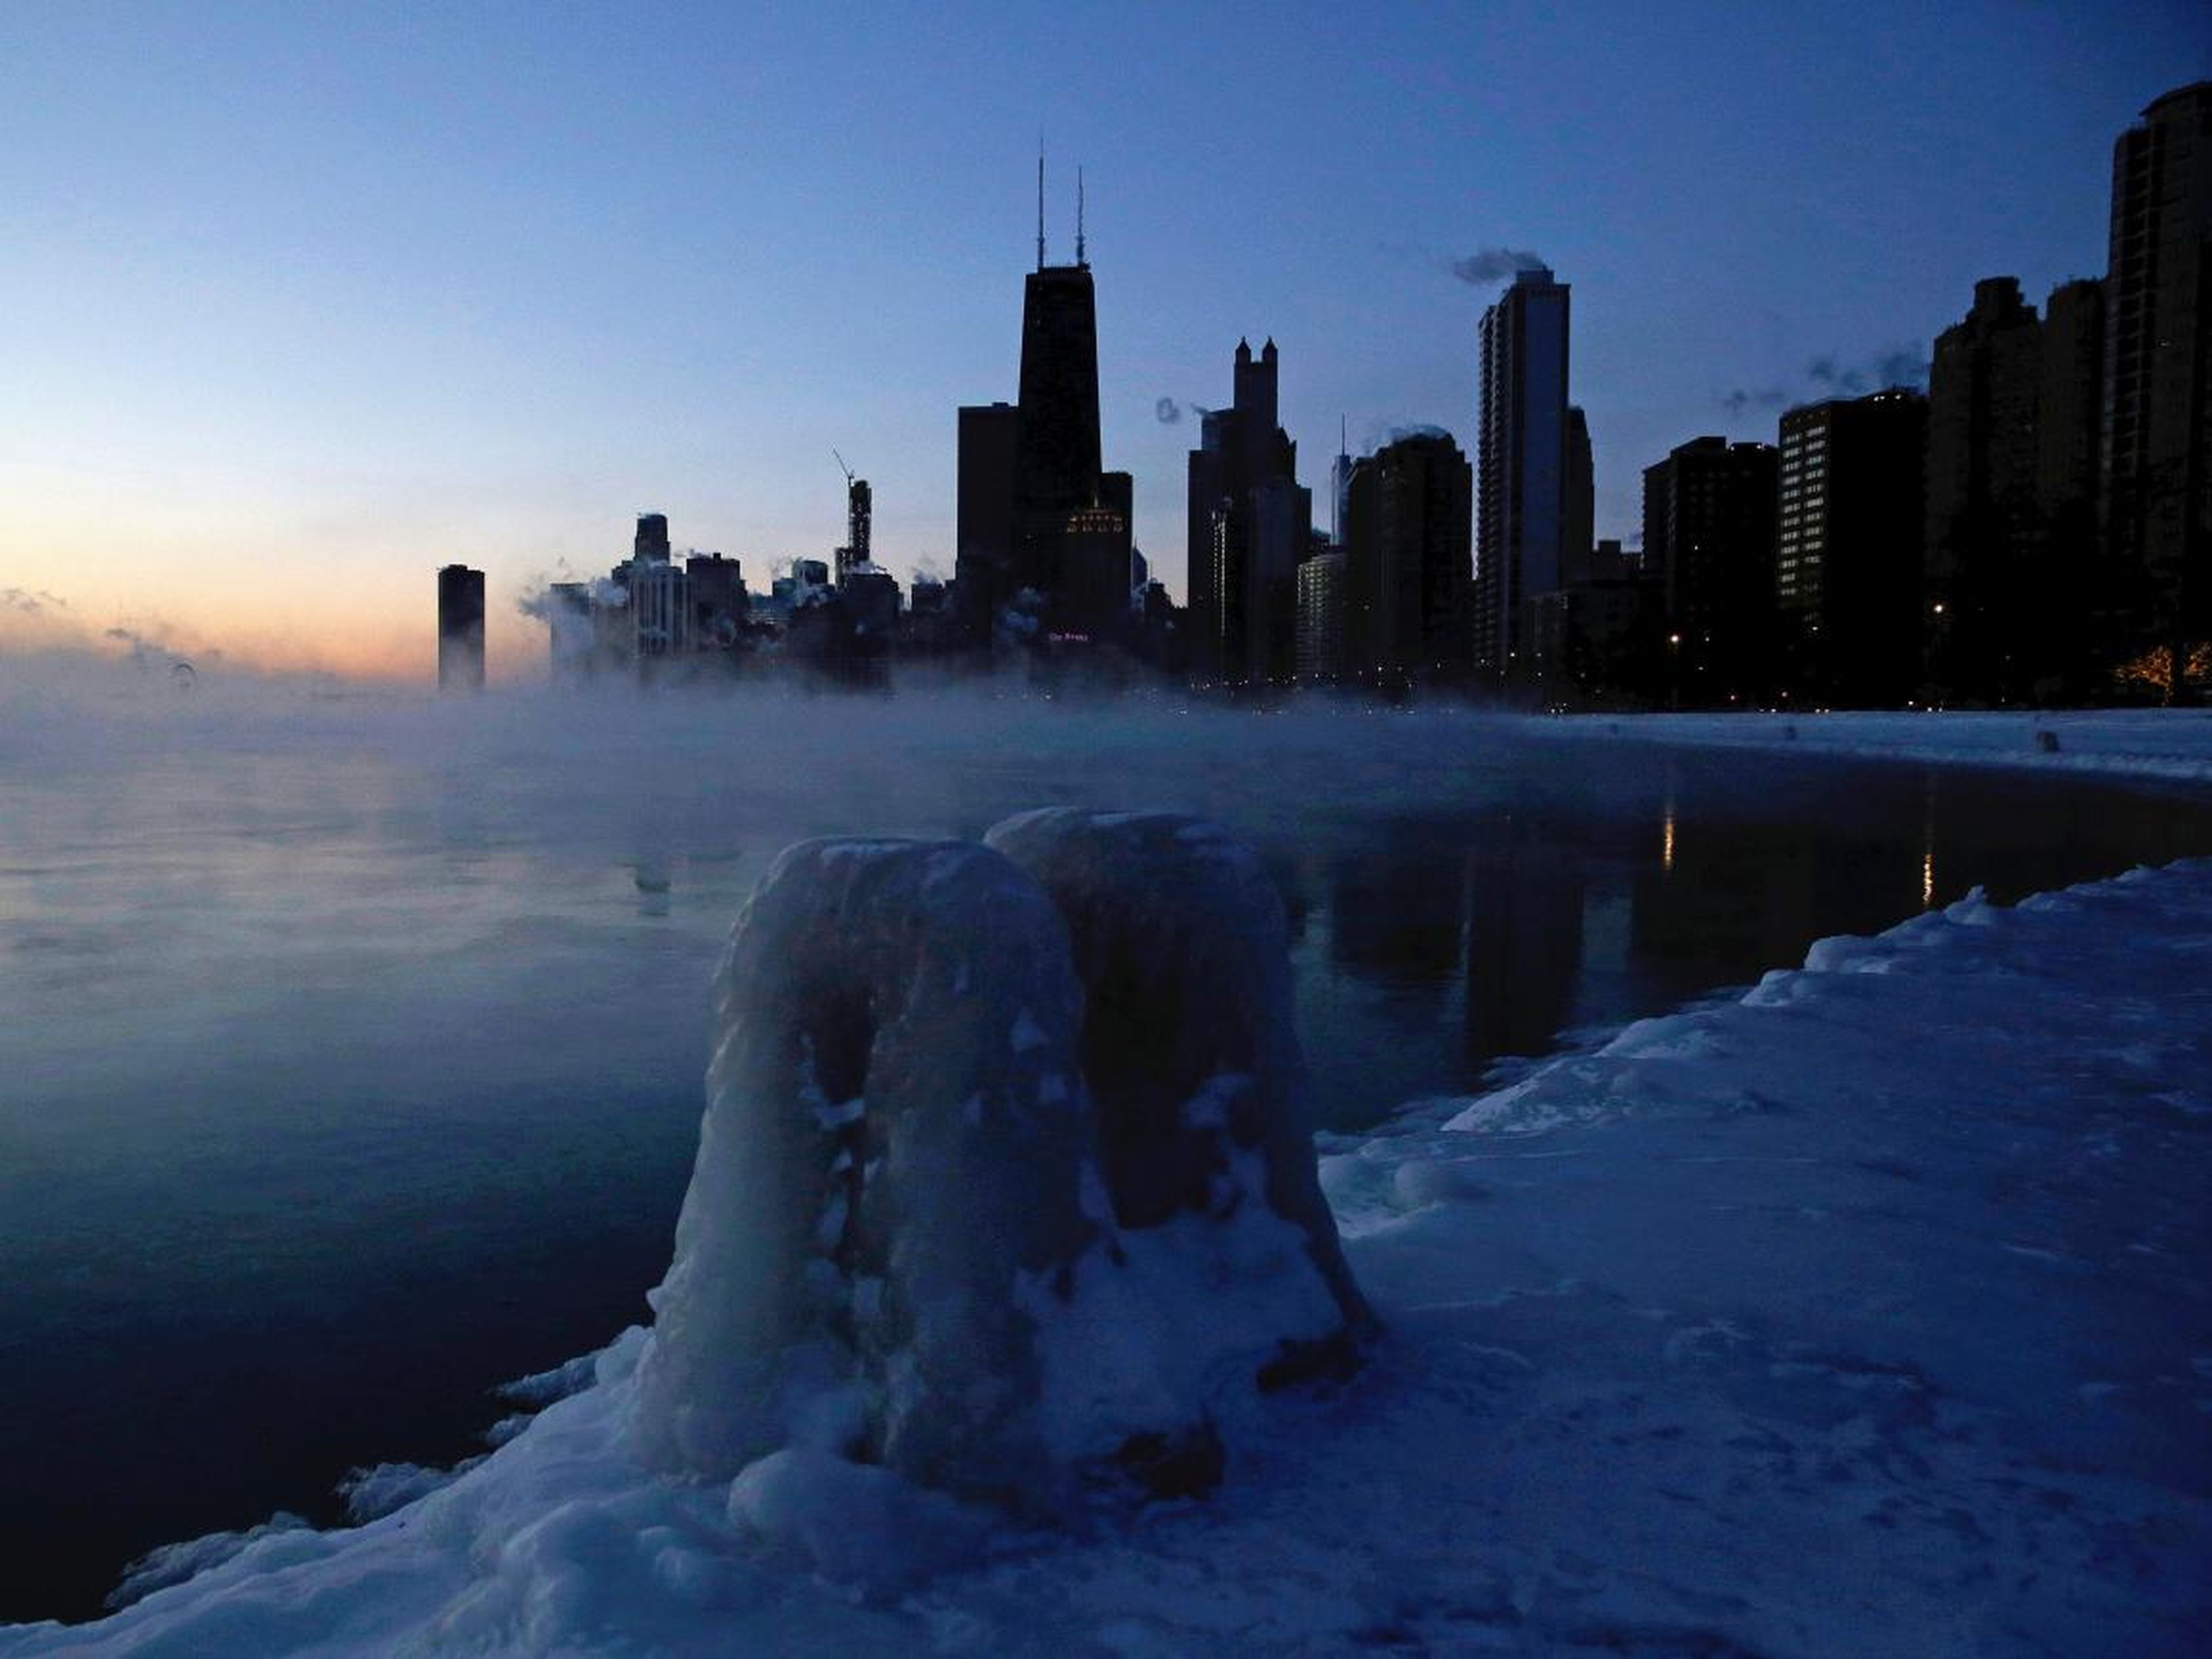 Steam rises up on the surface of Lake Michigan, January 30, 2019, in Chicago, Illinois.